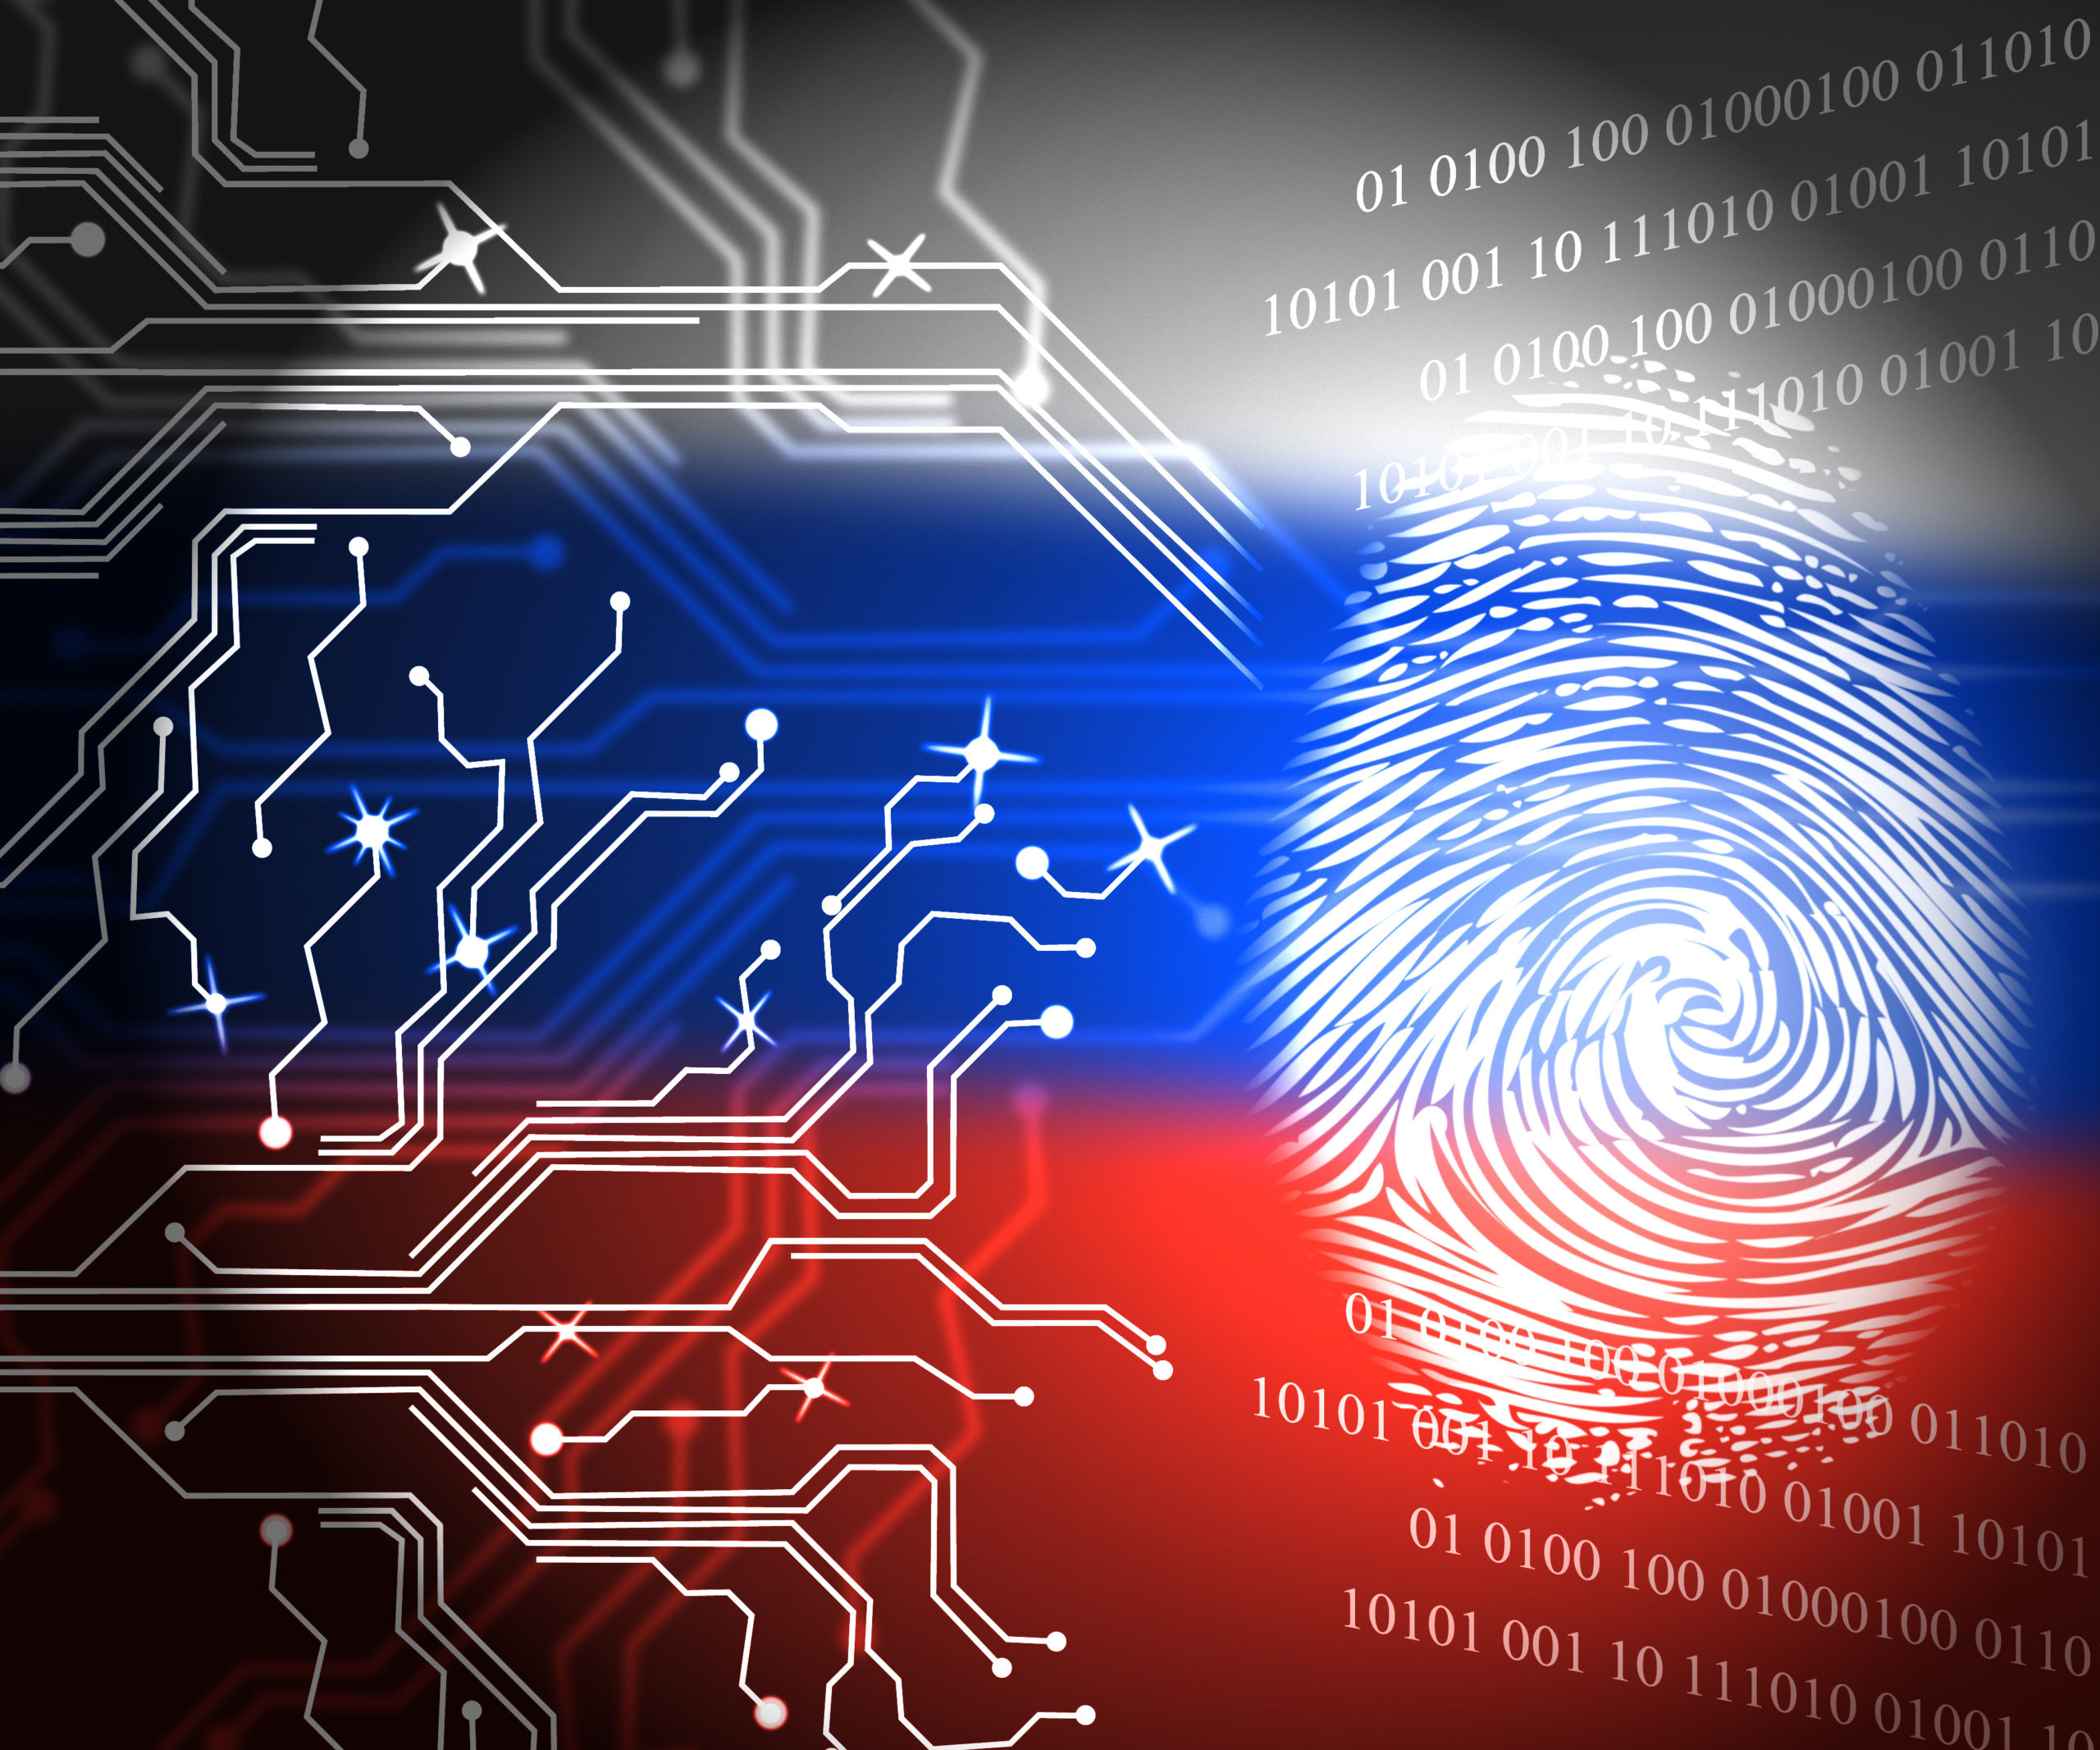 Reining In the Runet: The Kremlin’s Struggle to Control Cyberspace